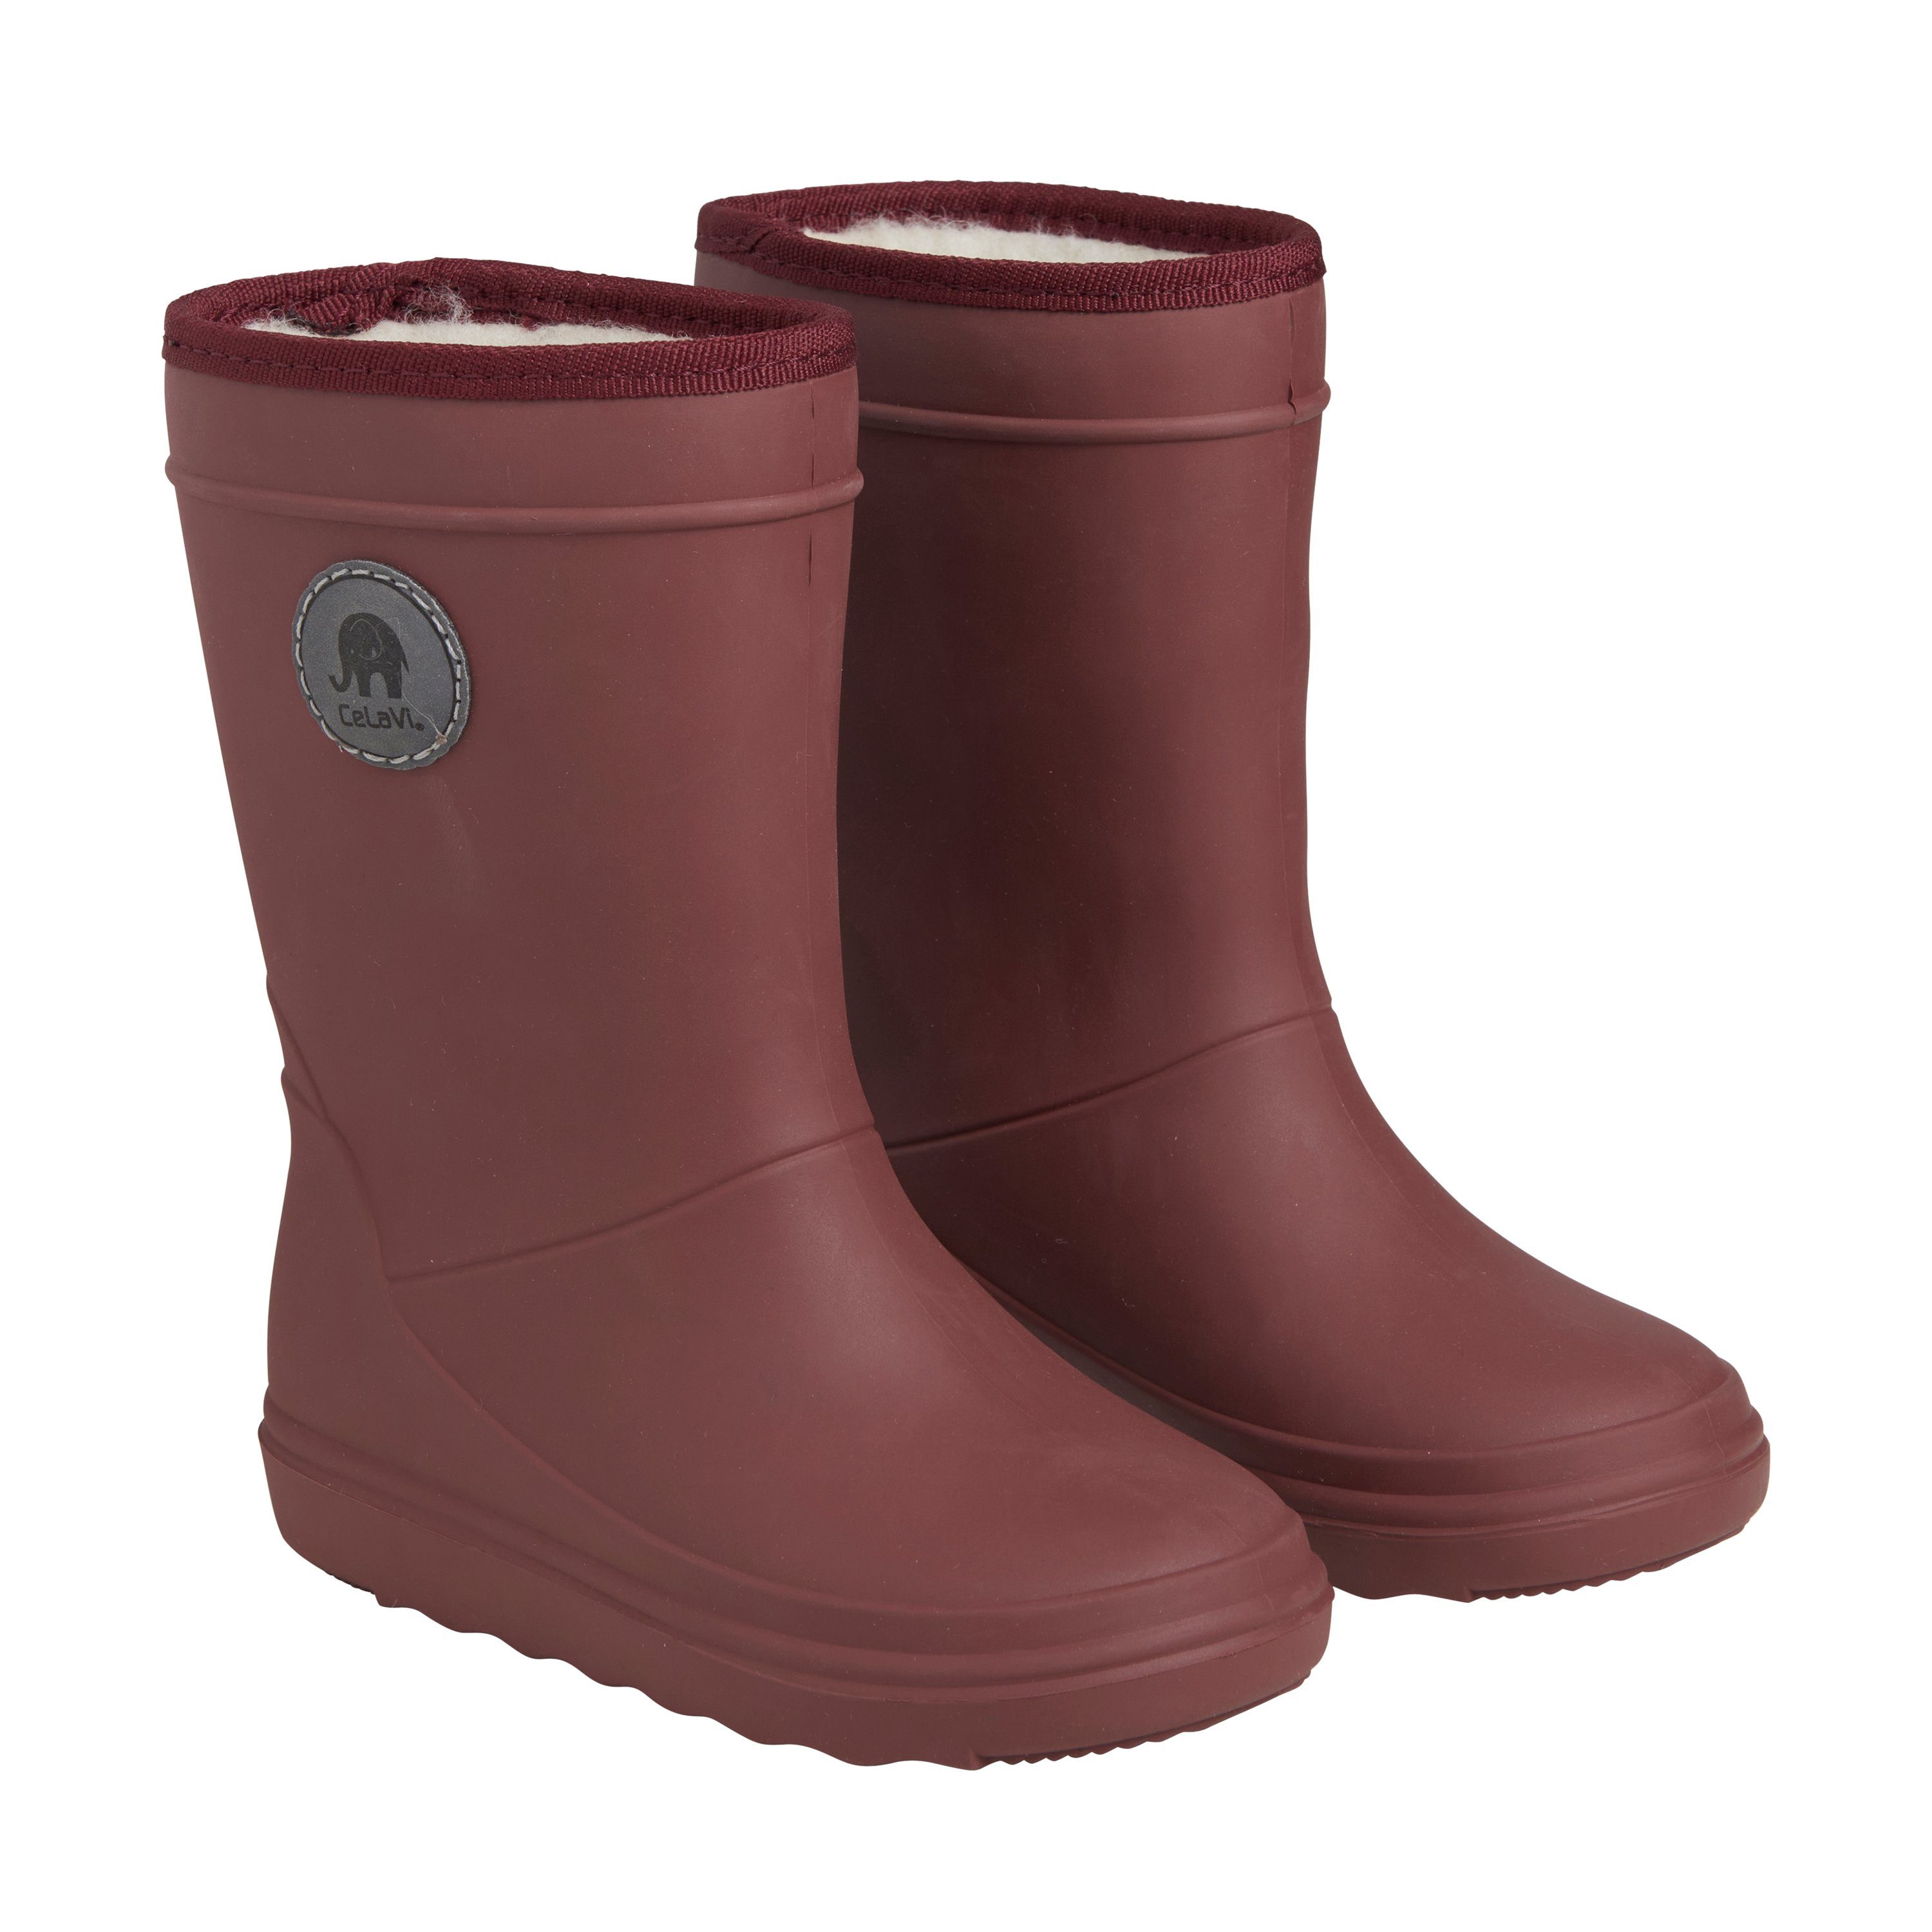 CeLaVi CEThermo Boots - 6274 Winterboots Rose Brown (694)